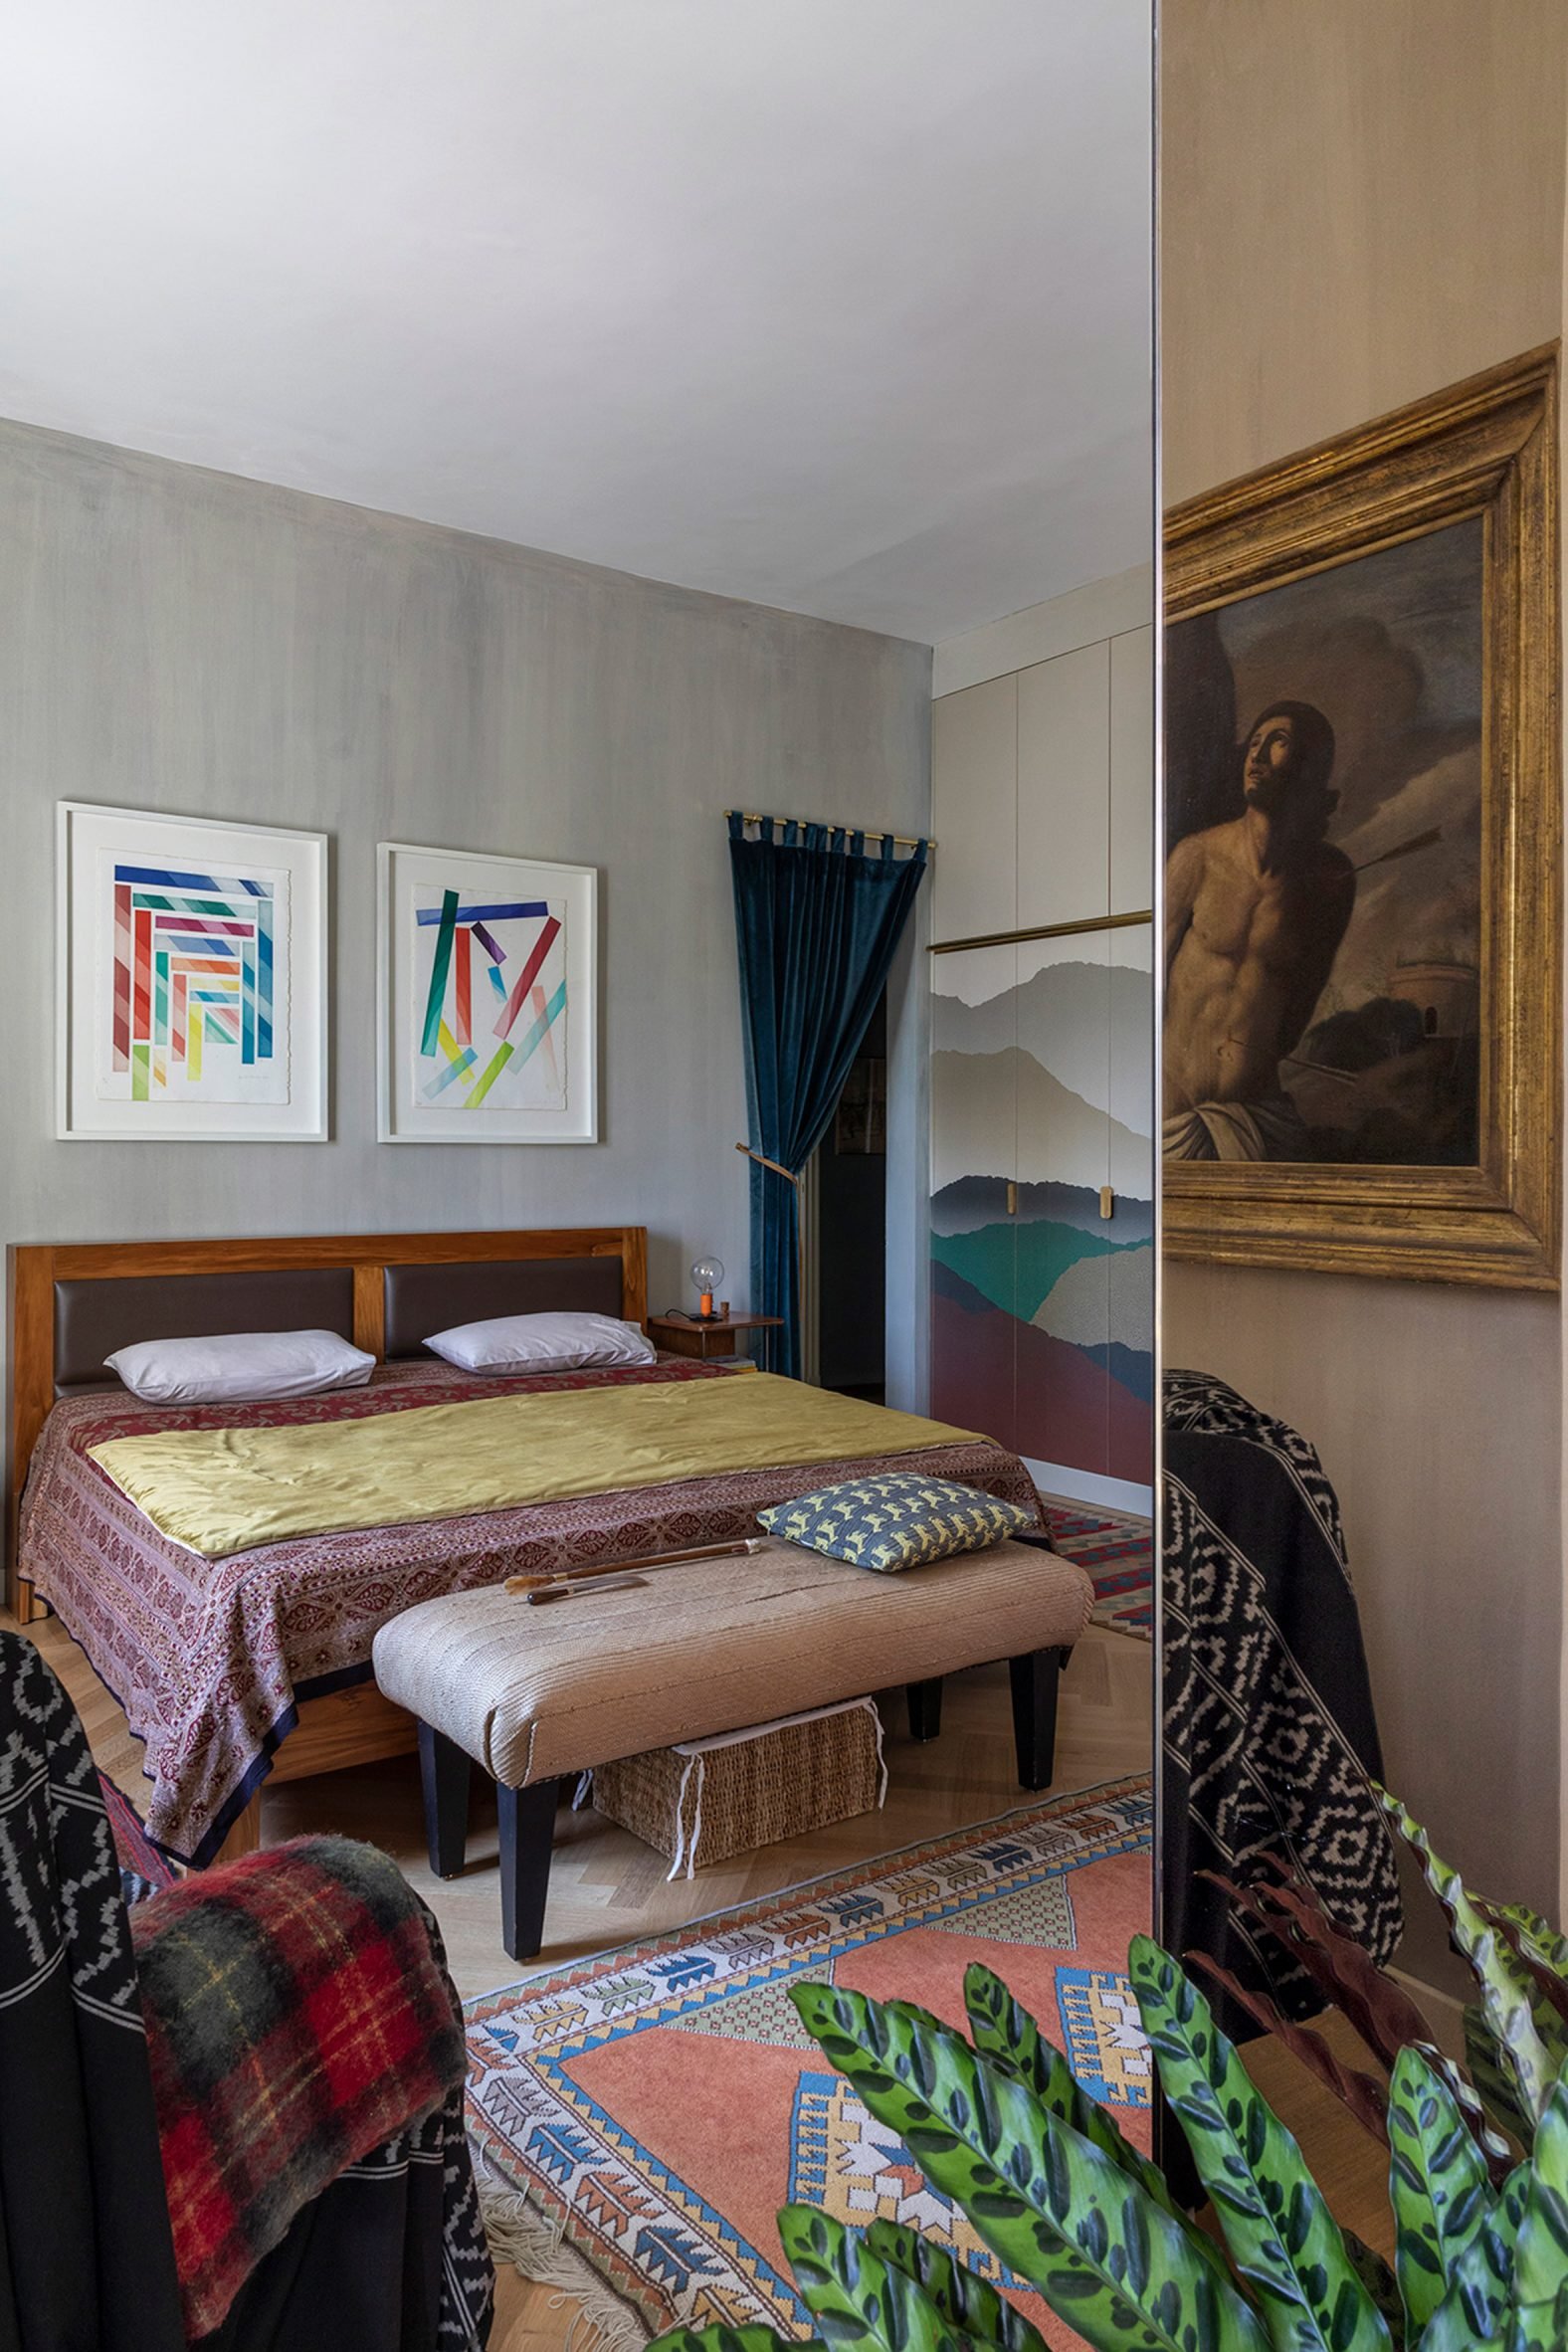 Bedroom of Rome apartment by 02A with mirrored walls and various artworks on the walls